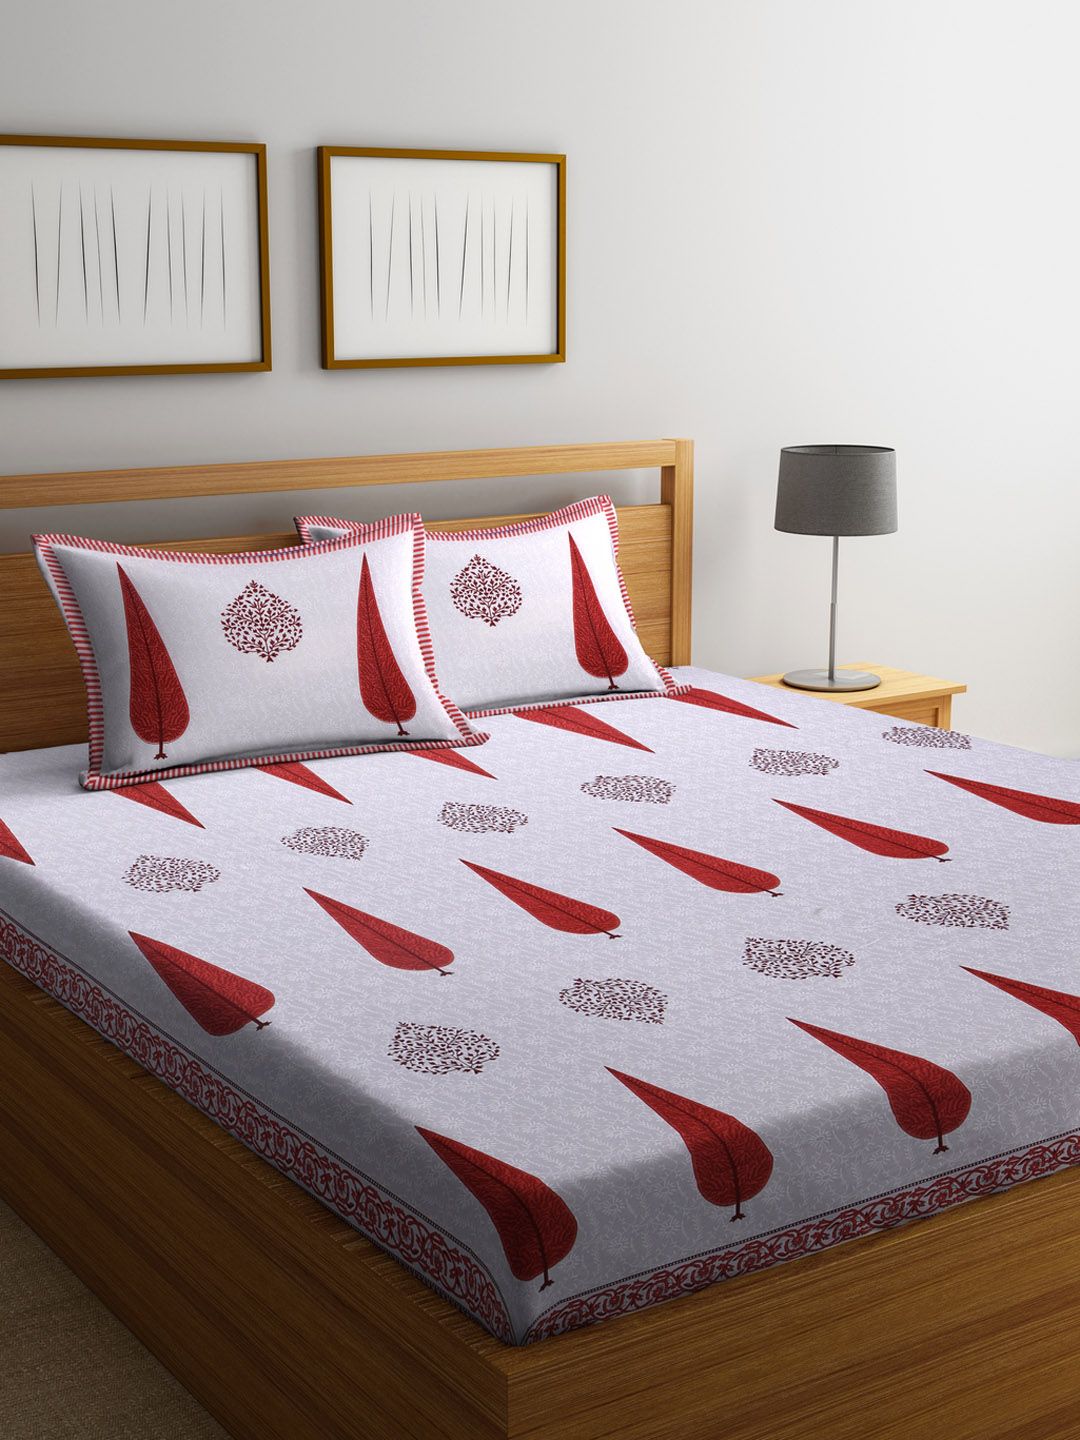 Rajasthan Decor White & Red Floral Flat 180 TC Cotton 1 King Bedsheet with 2 Pillow Covers Price in India